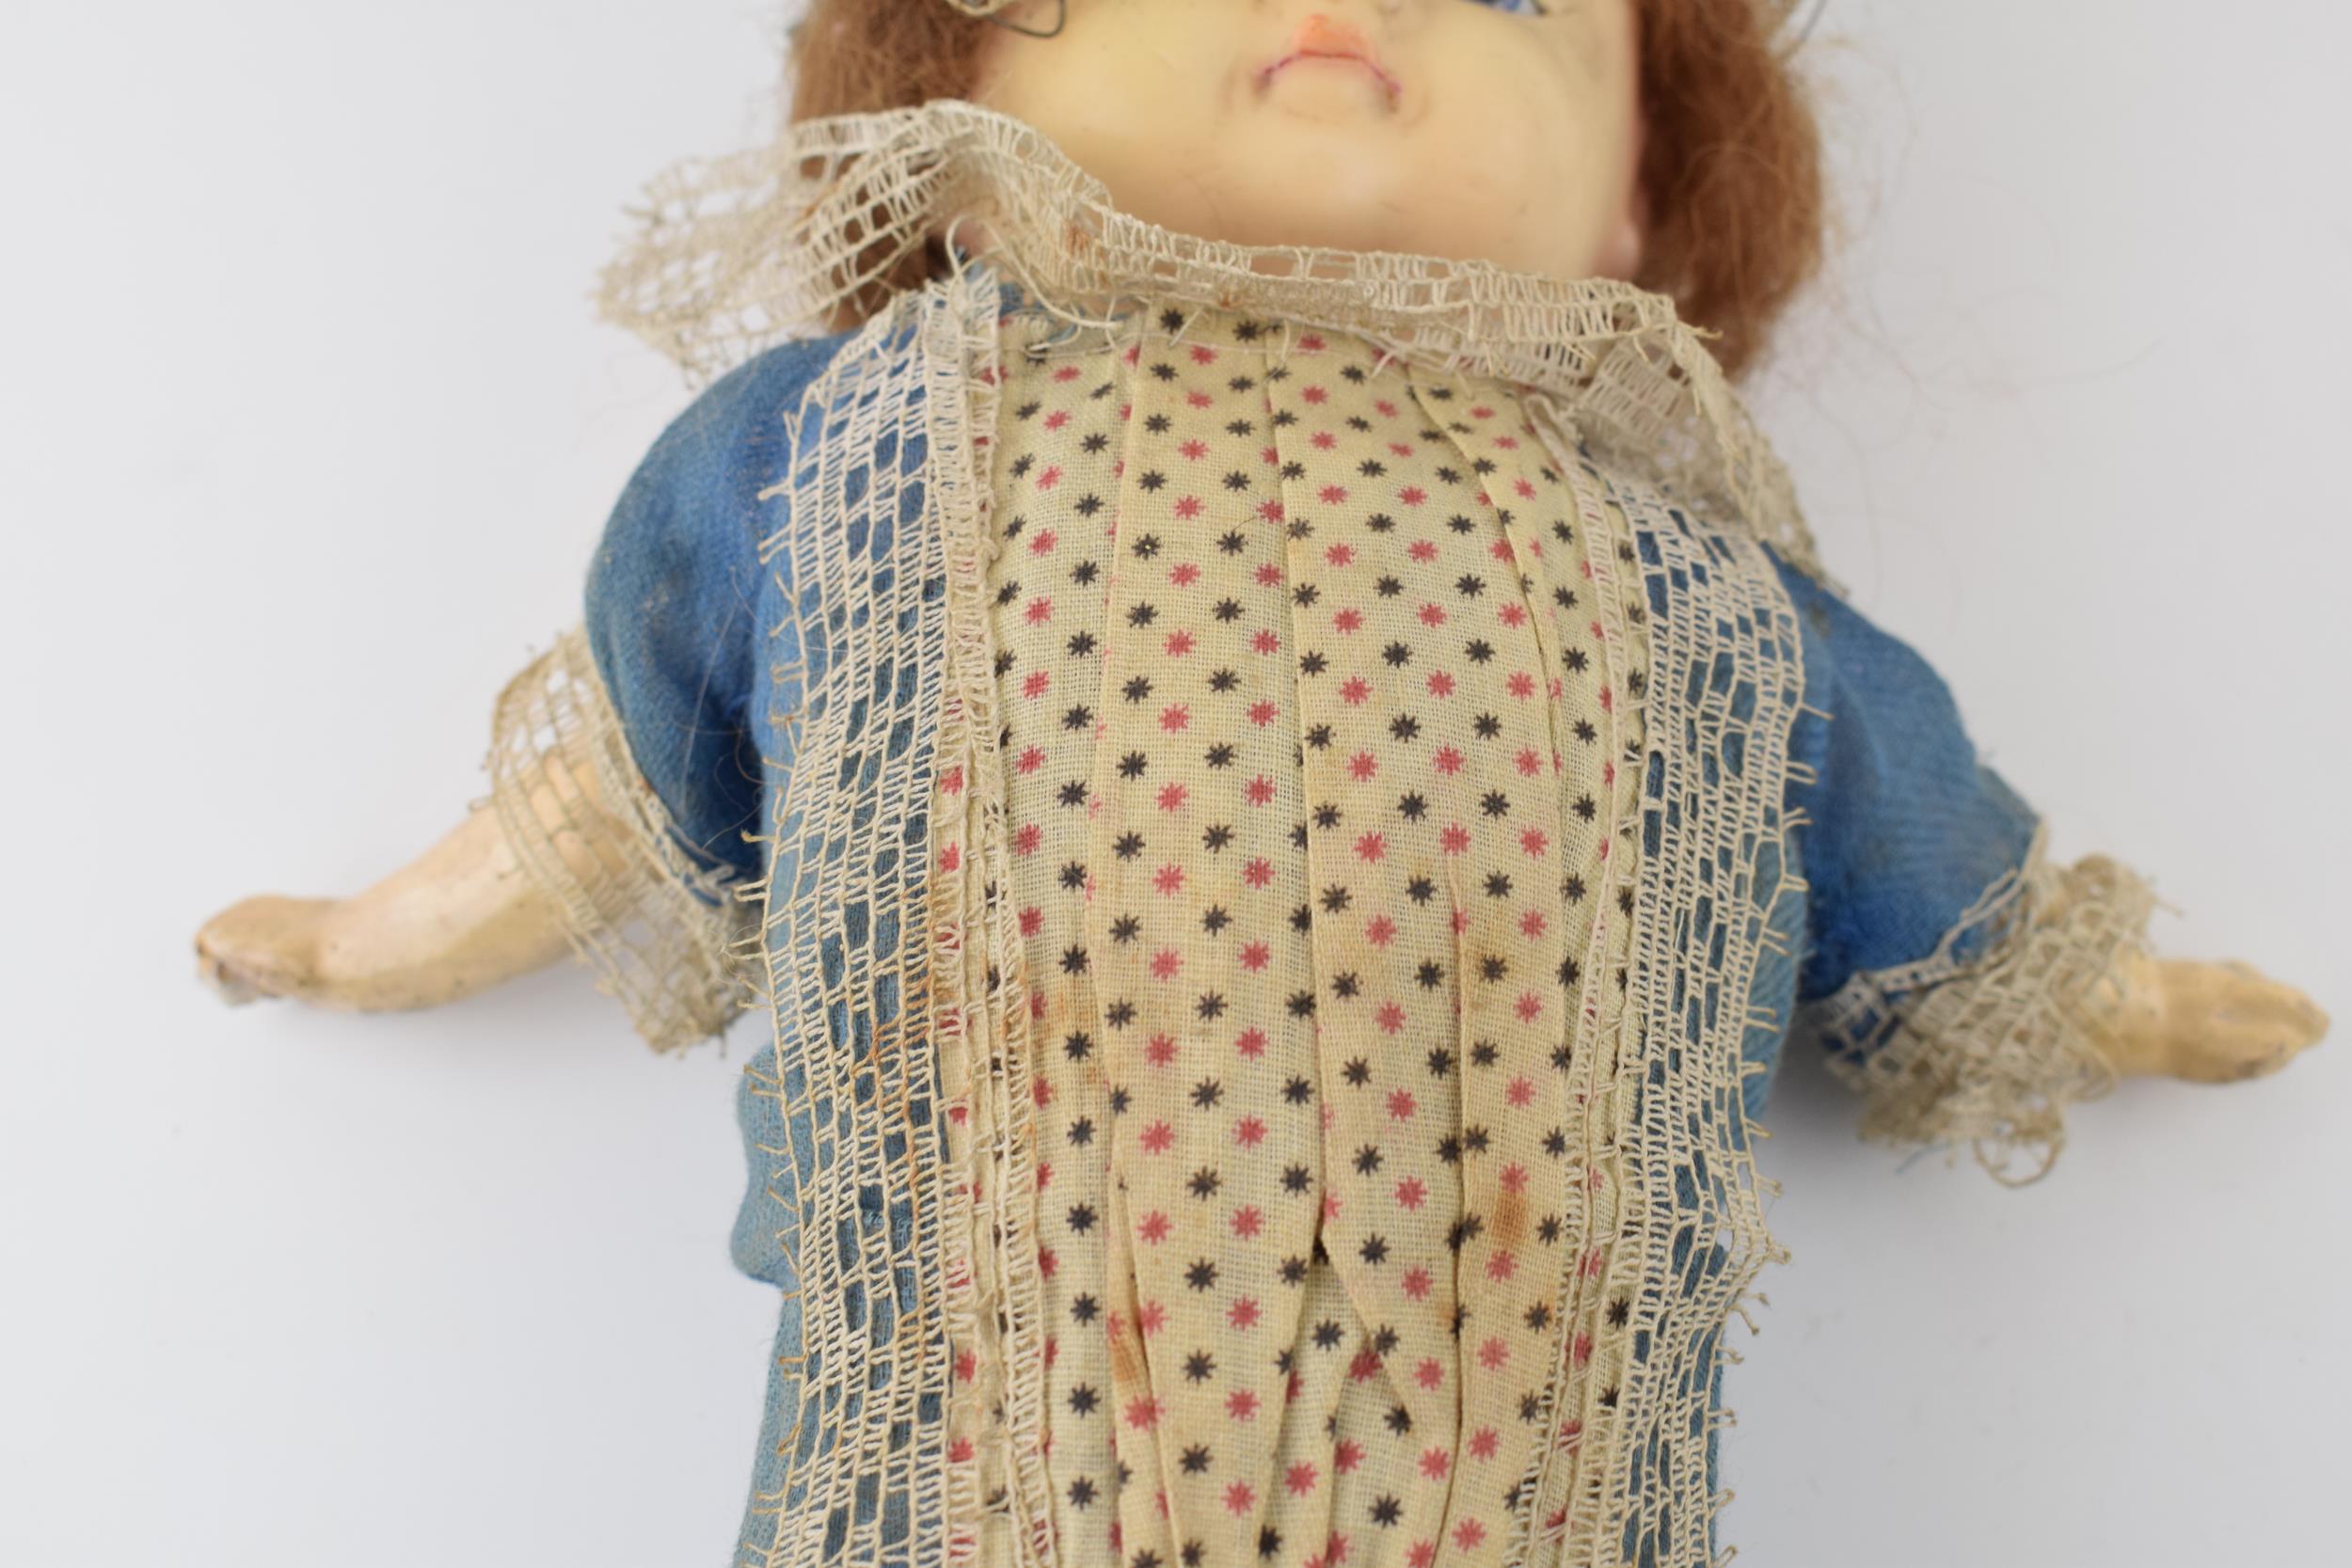 Wax head antique doll in blue dress c1860. Height 54cm. In good antique condition with some light - Image 5 of 7